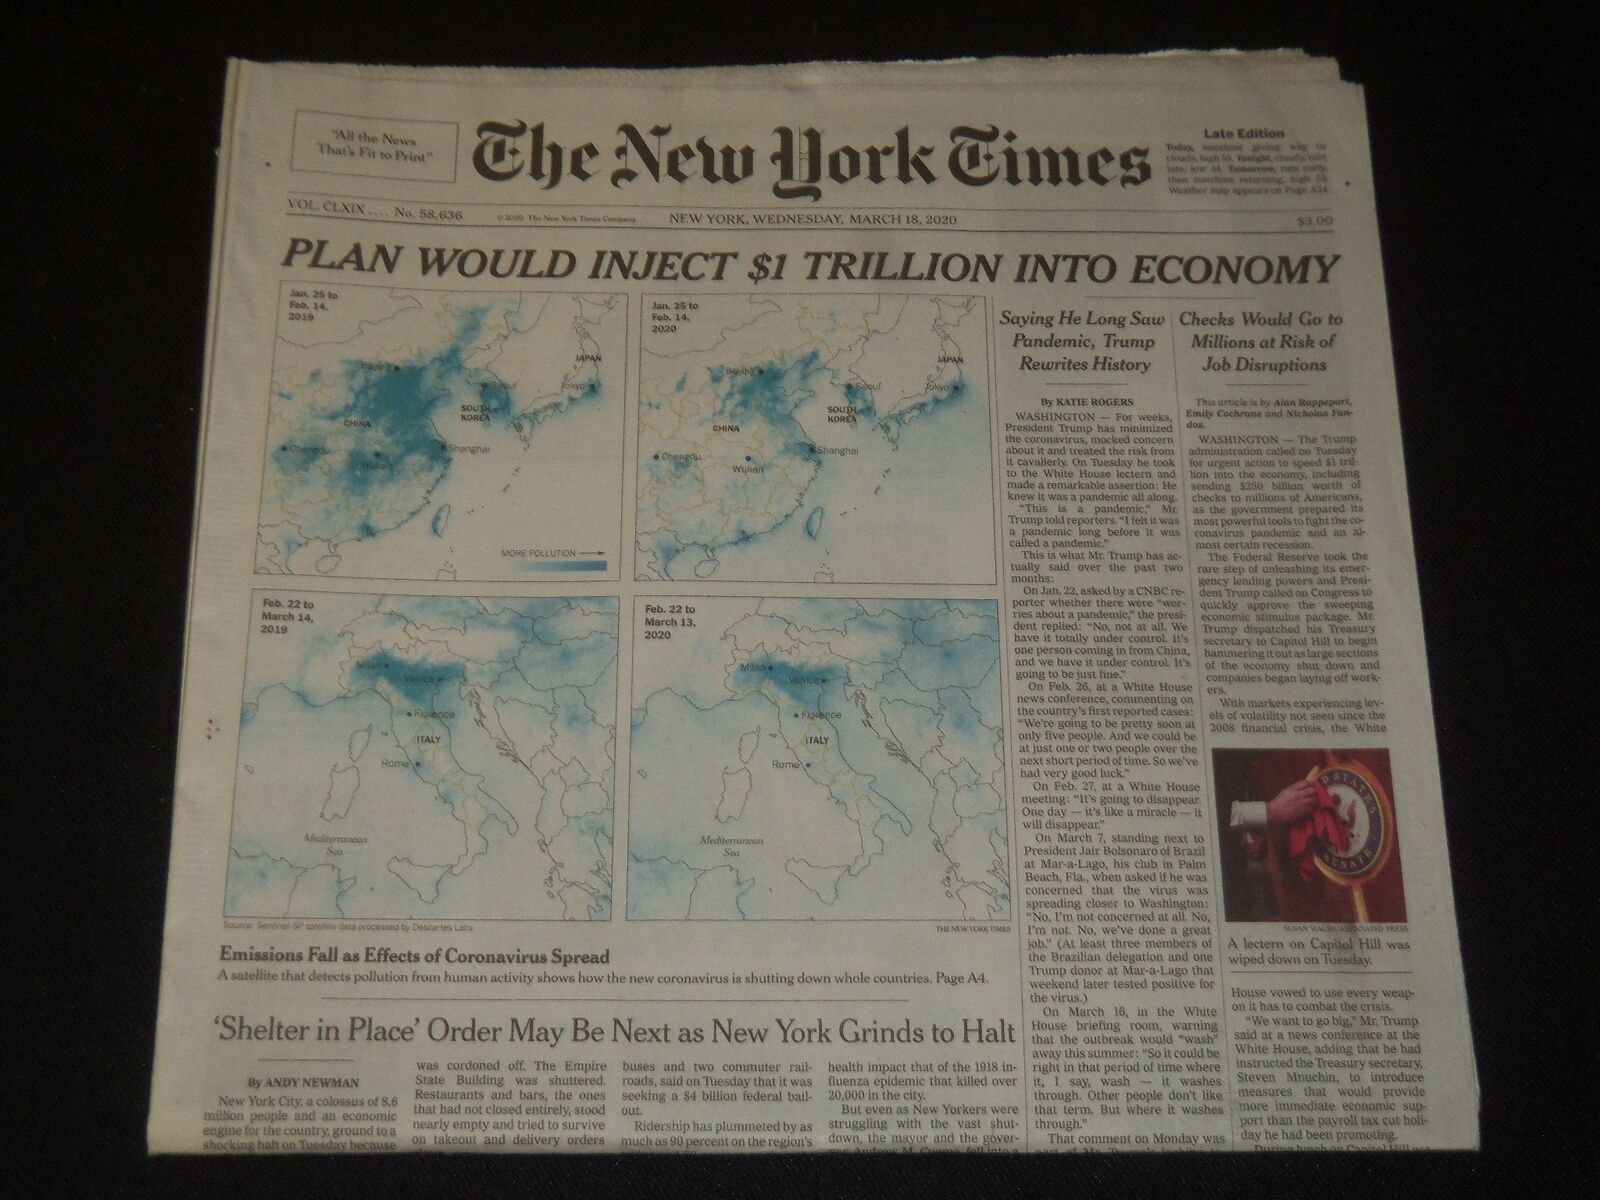 2020 MARCH 18 NEW YORK TIMES - PLAN WOULD INJECT $1 TRILLION INTO ECONOMY